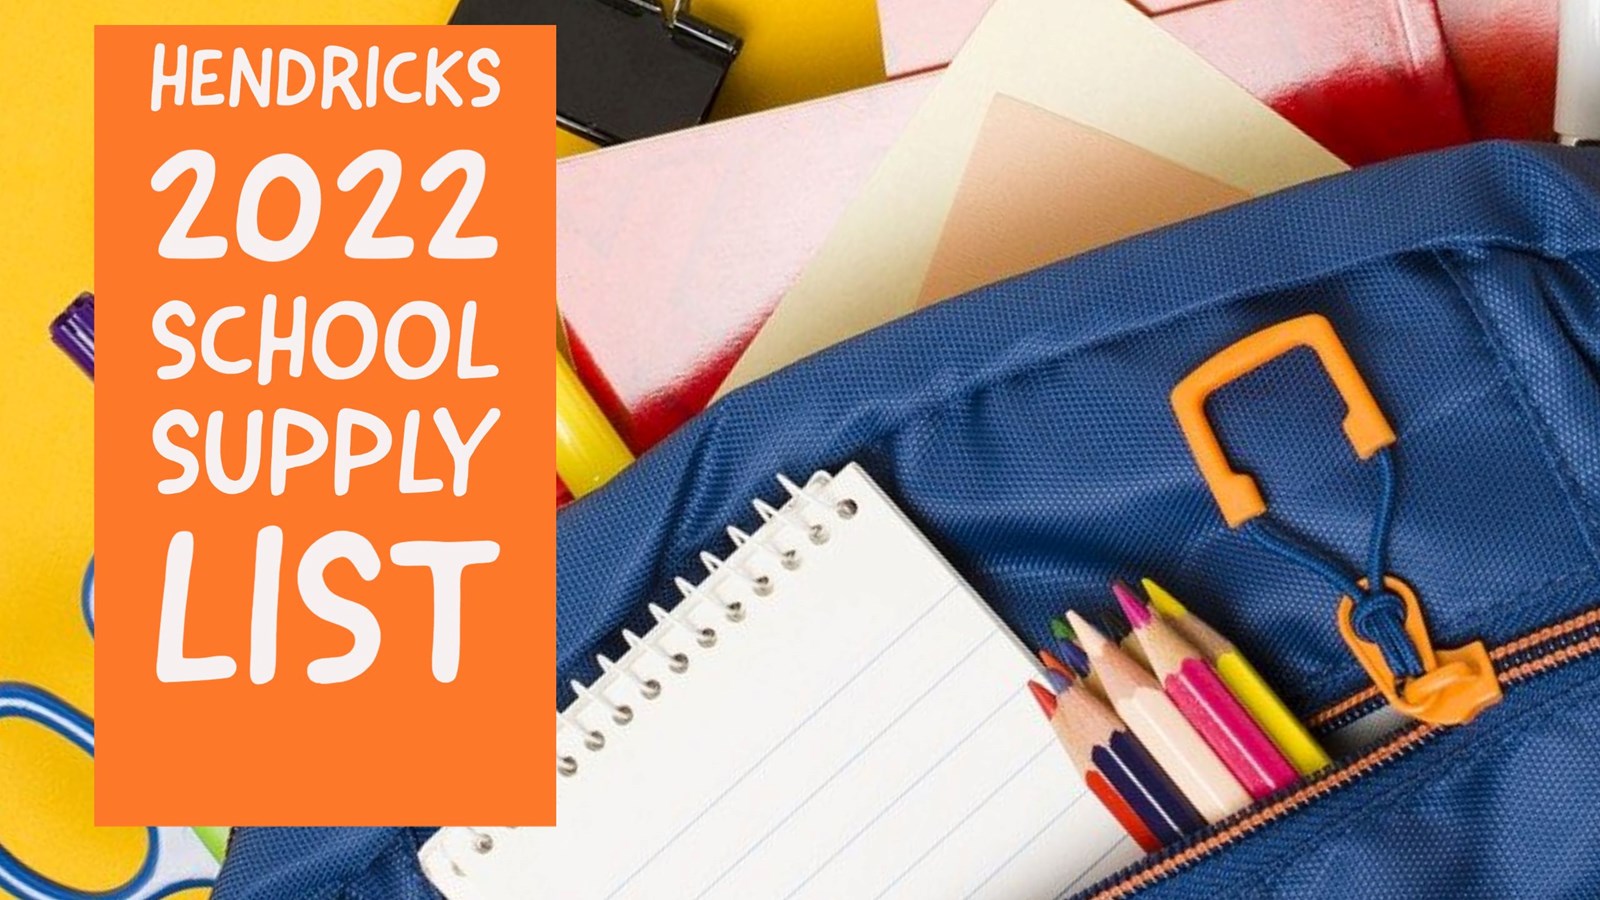 colorful student backpack filled with supplies plus text stating Hendricks 2022 school supply list